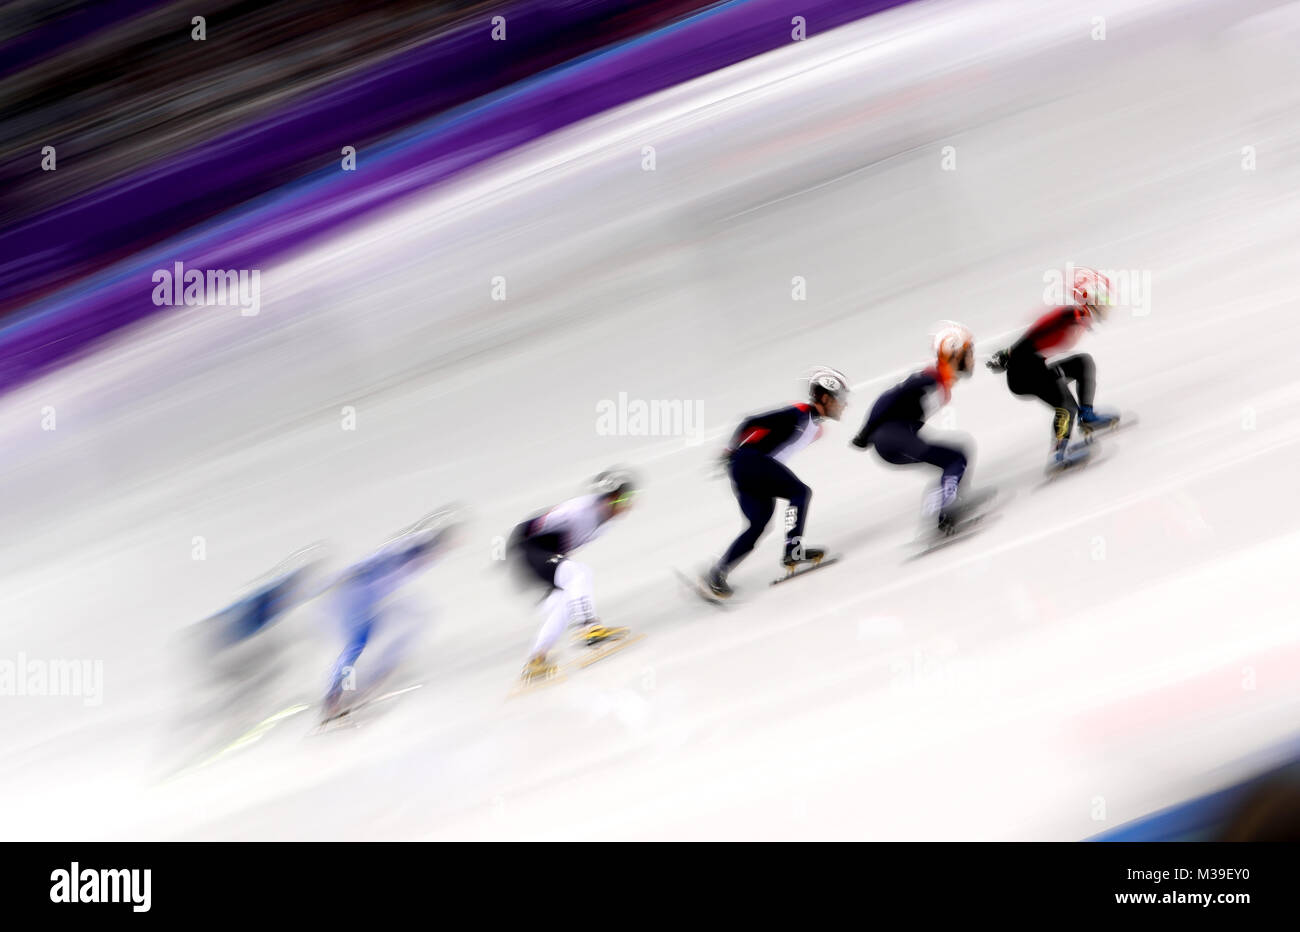 The Men's 1500m Short Track Final A during day one of the PyeongChang 2018 Winter Olympic Games in South Korea. Stock Photo